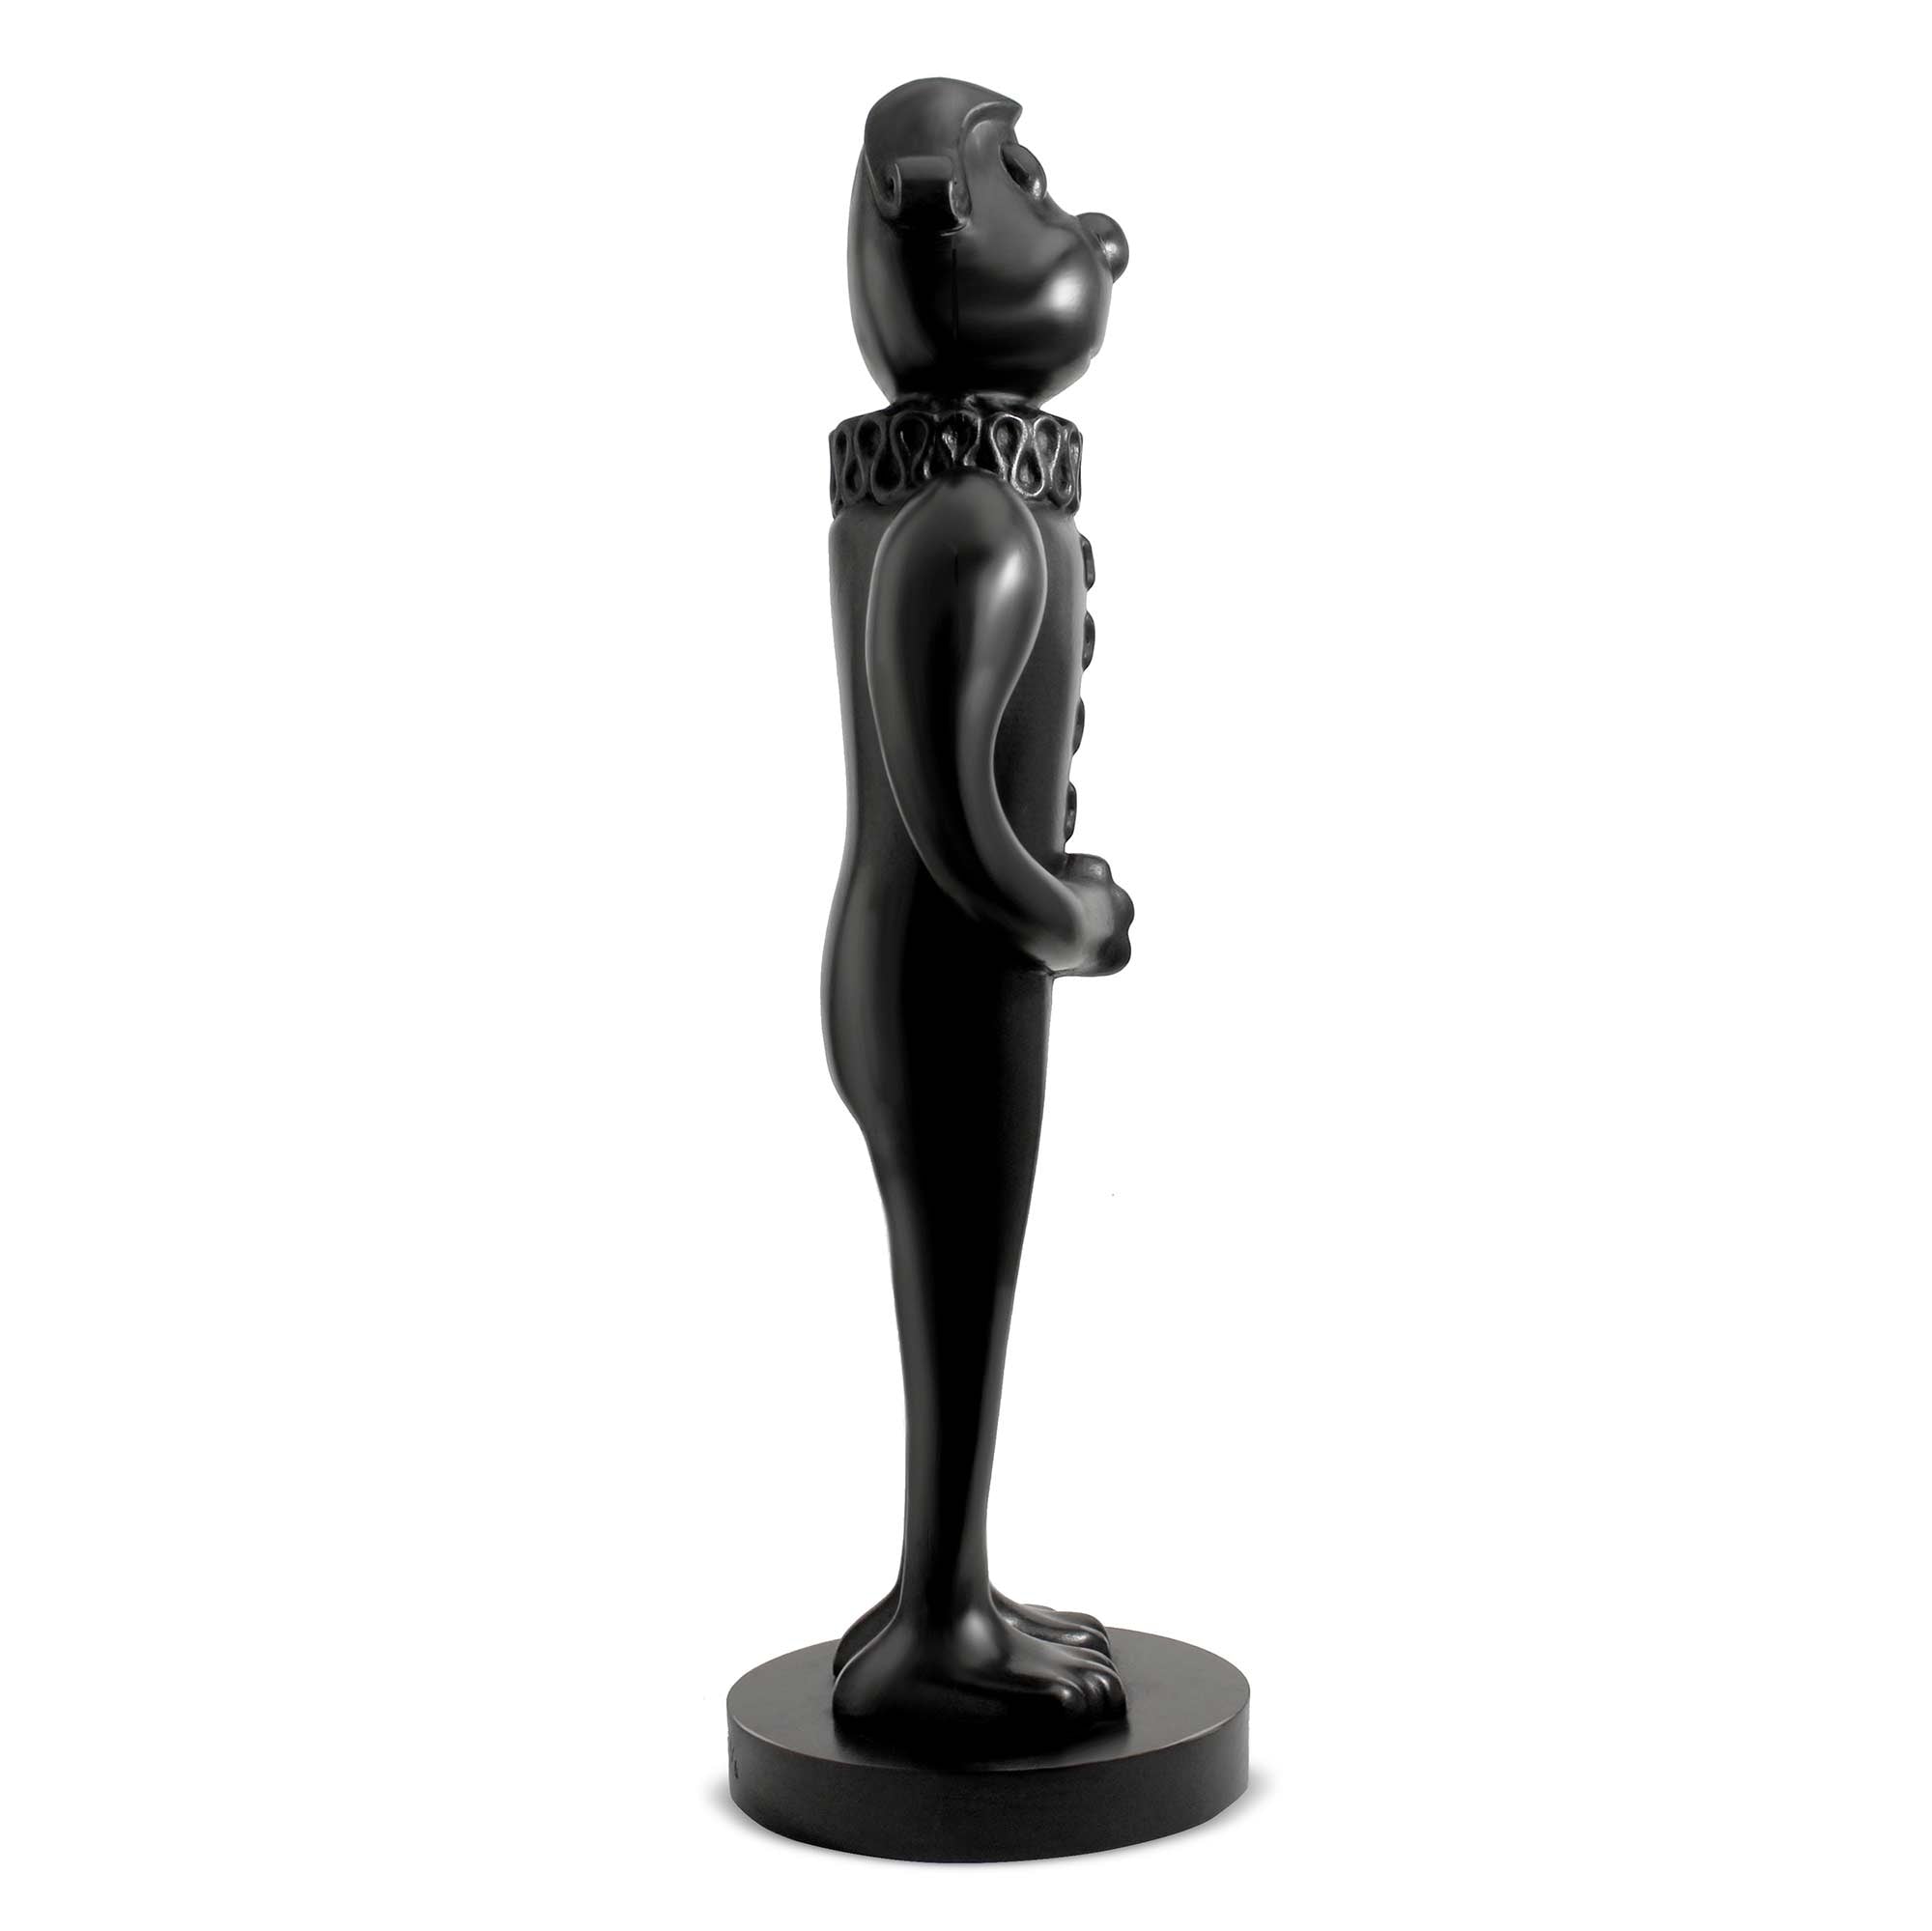 William, dog wood sculpture with black polished, by artist Ferdi B Dick, side view